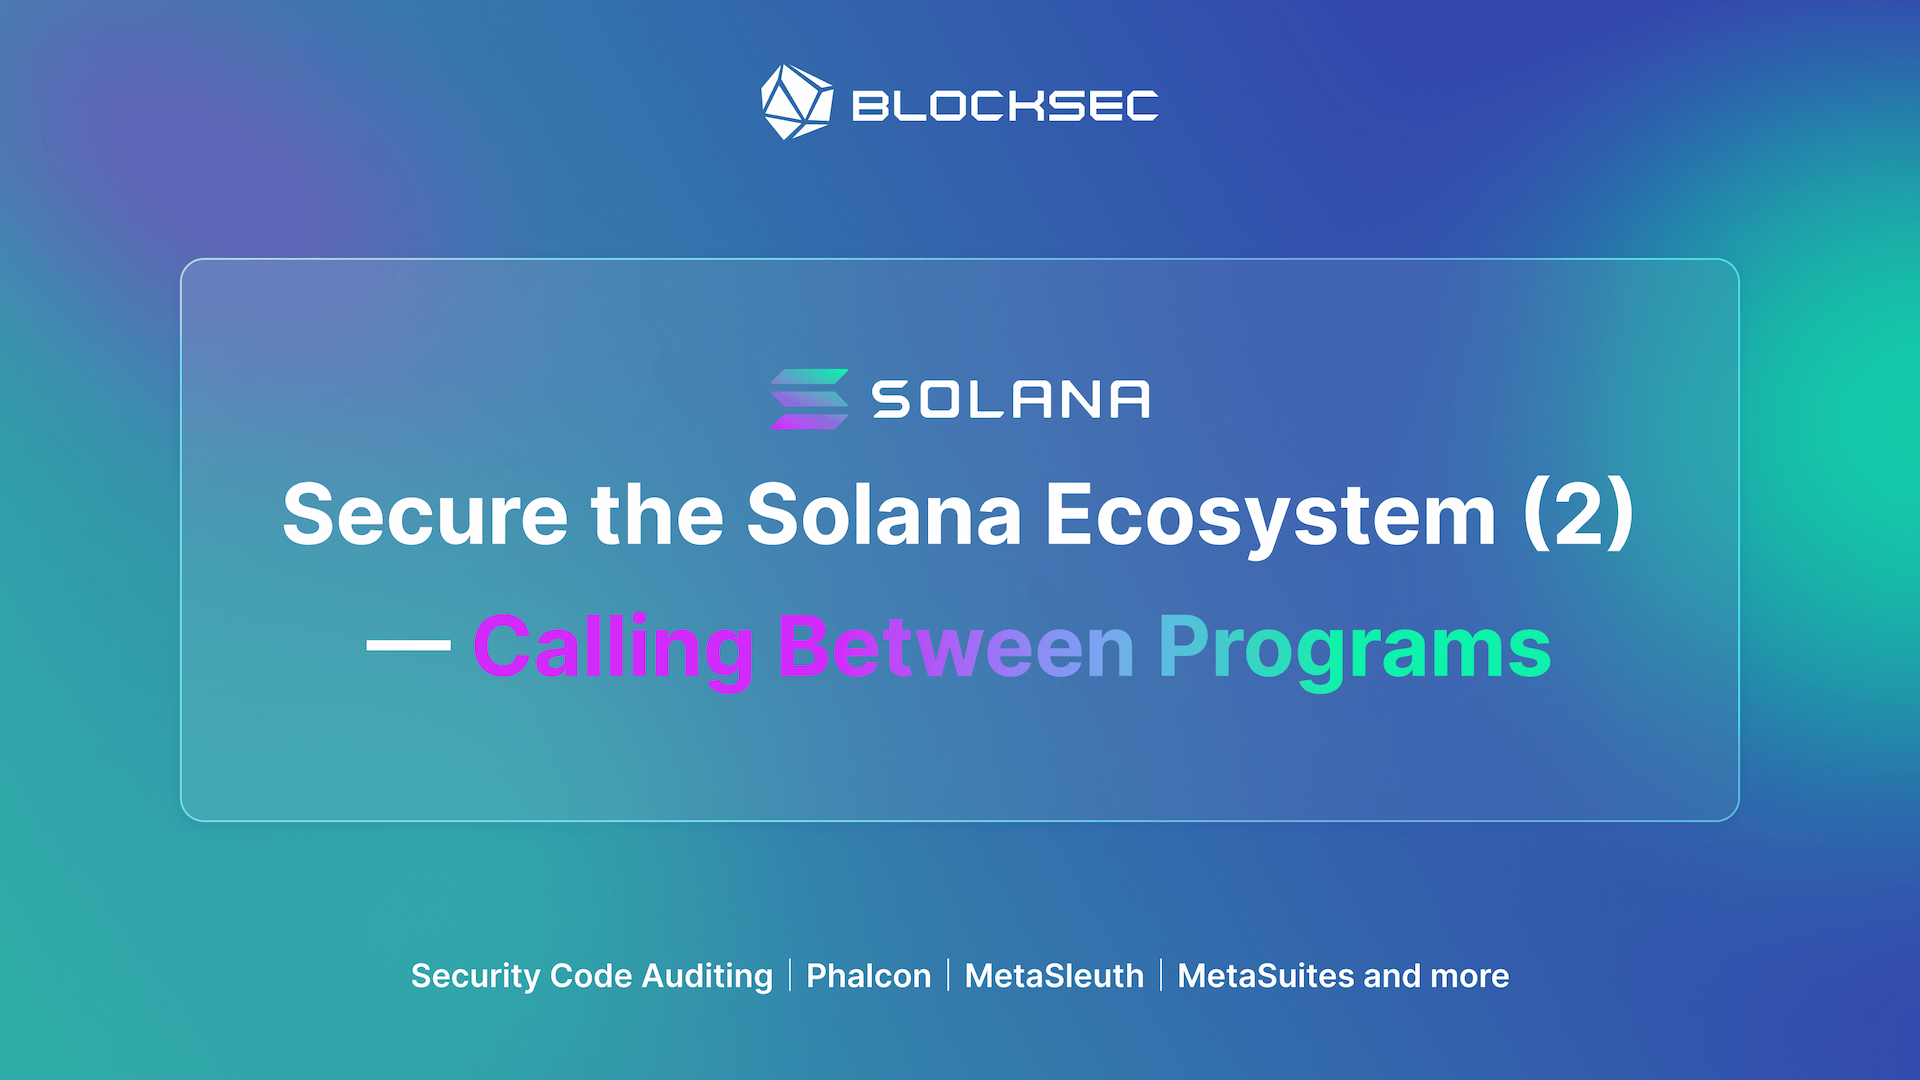 Secure the Solana Ecosystem (2) — Calling Between Programs